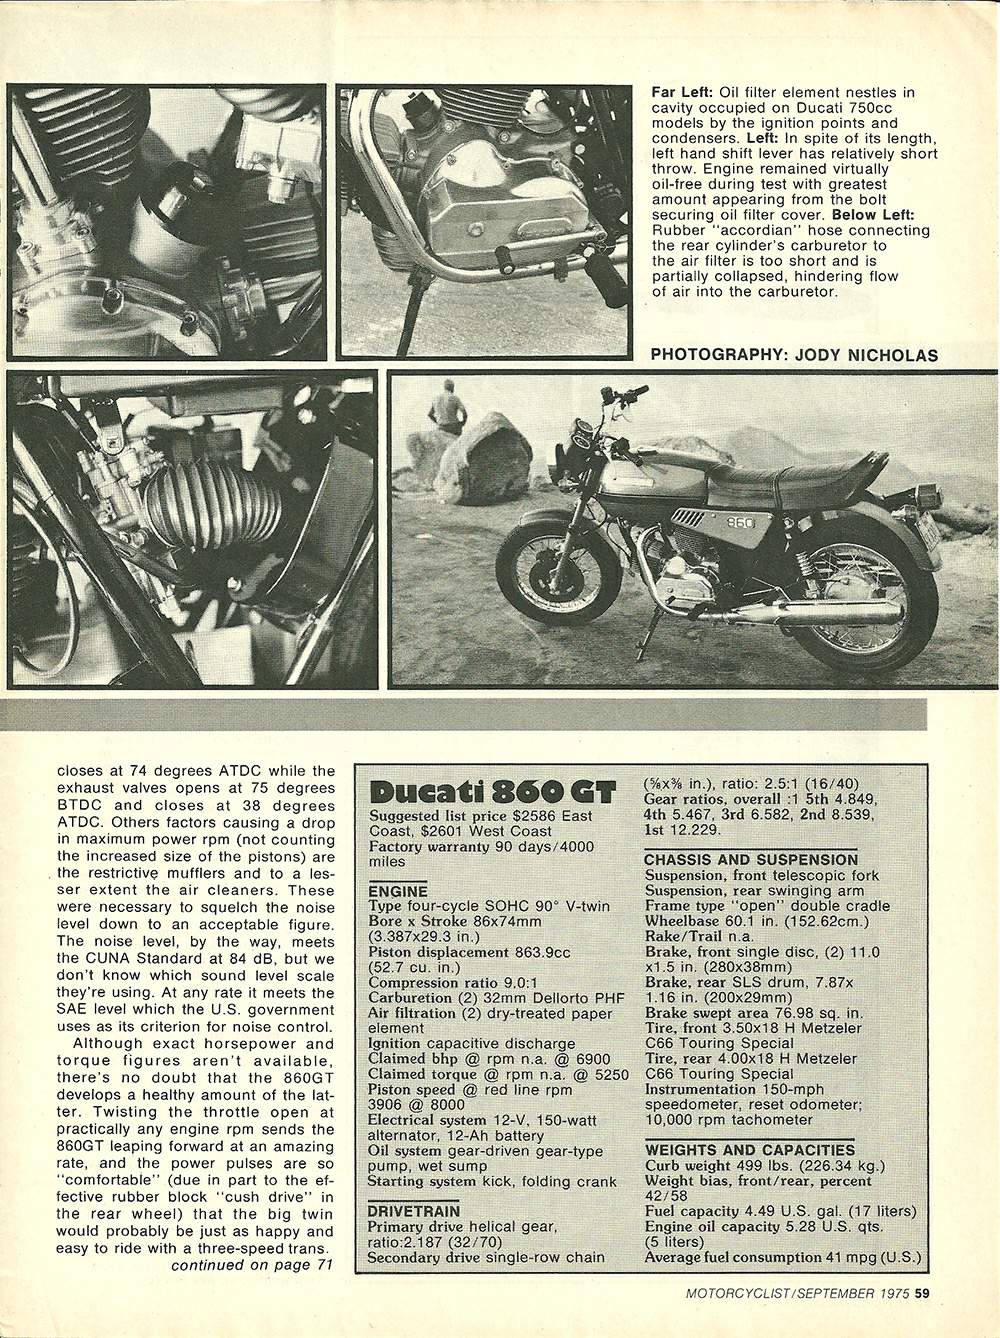 Ducati 860GT technical specifications